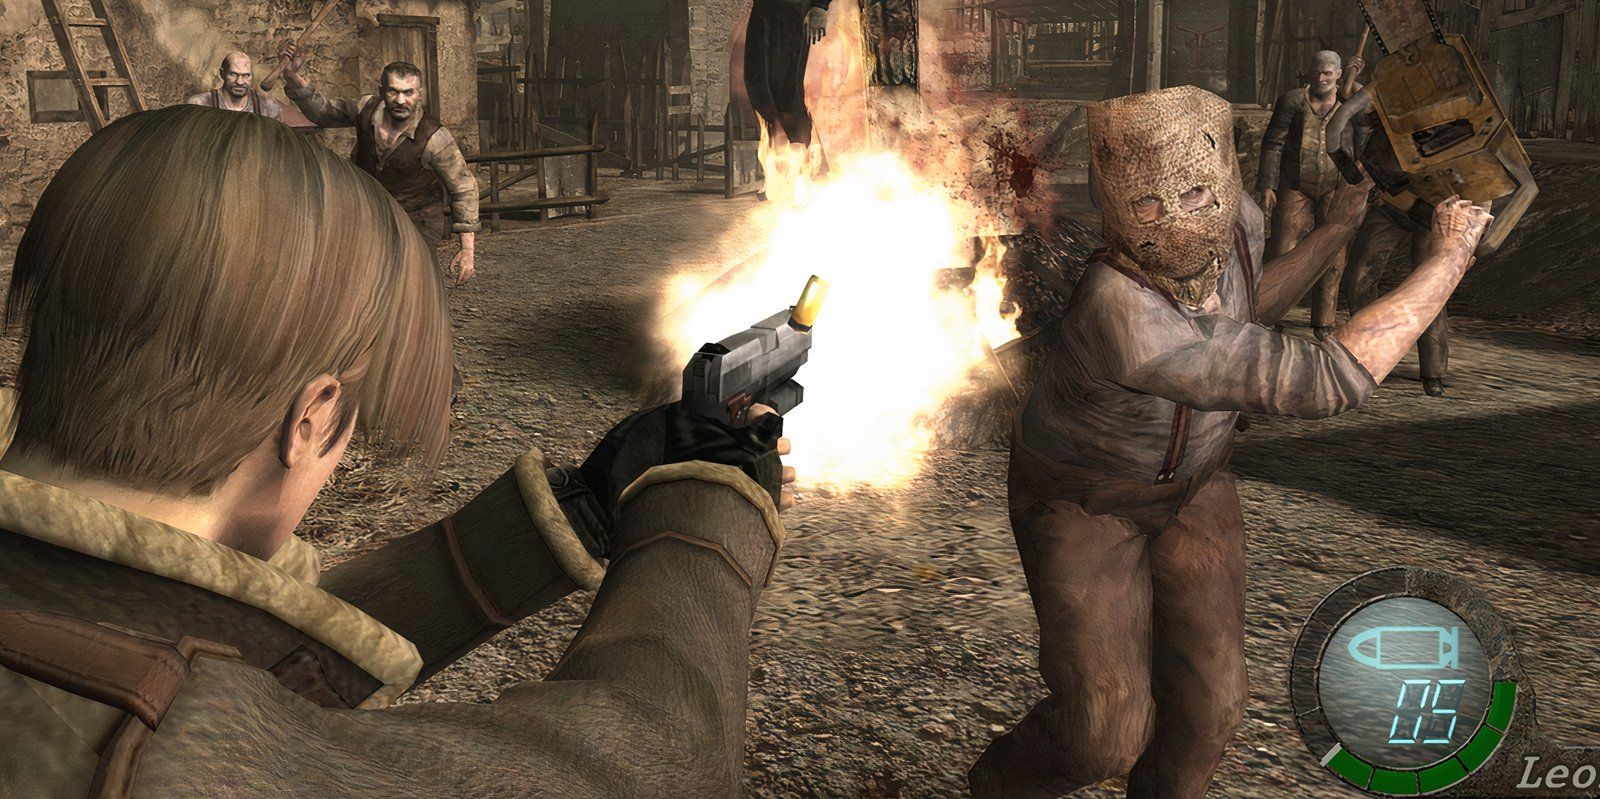 leon shooting at villagers in re4